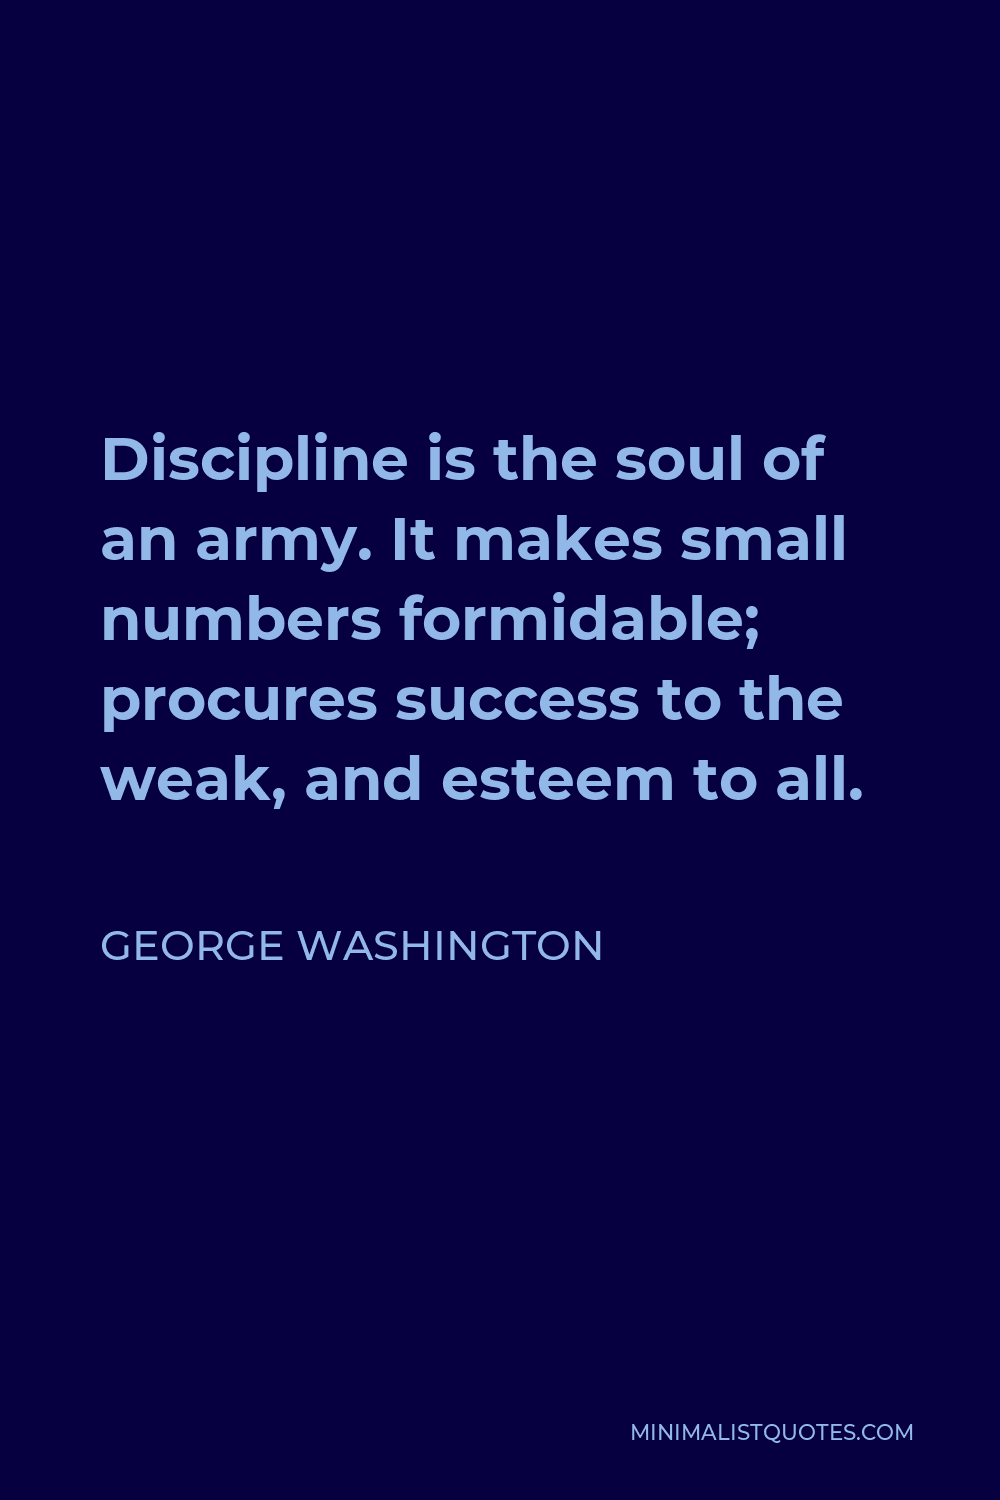 George Washington Quote - Discipline is the soul of an army. It makes small numbers formidable; procures success to the weak, and esteem to all.